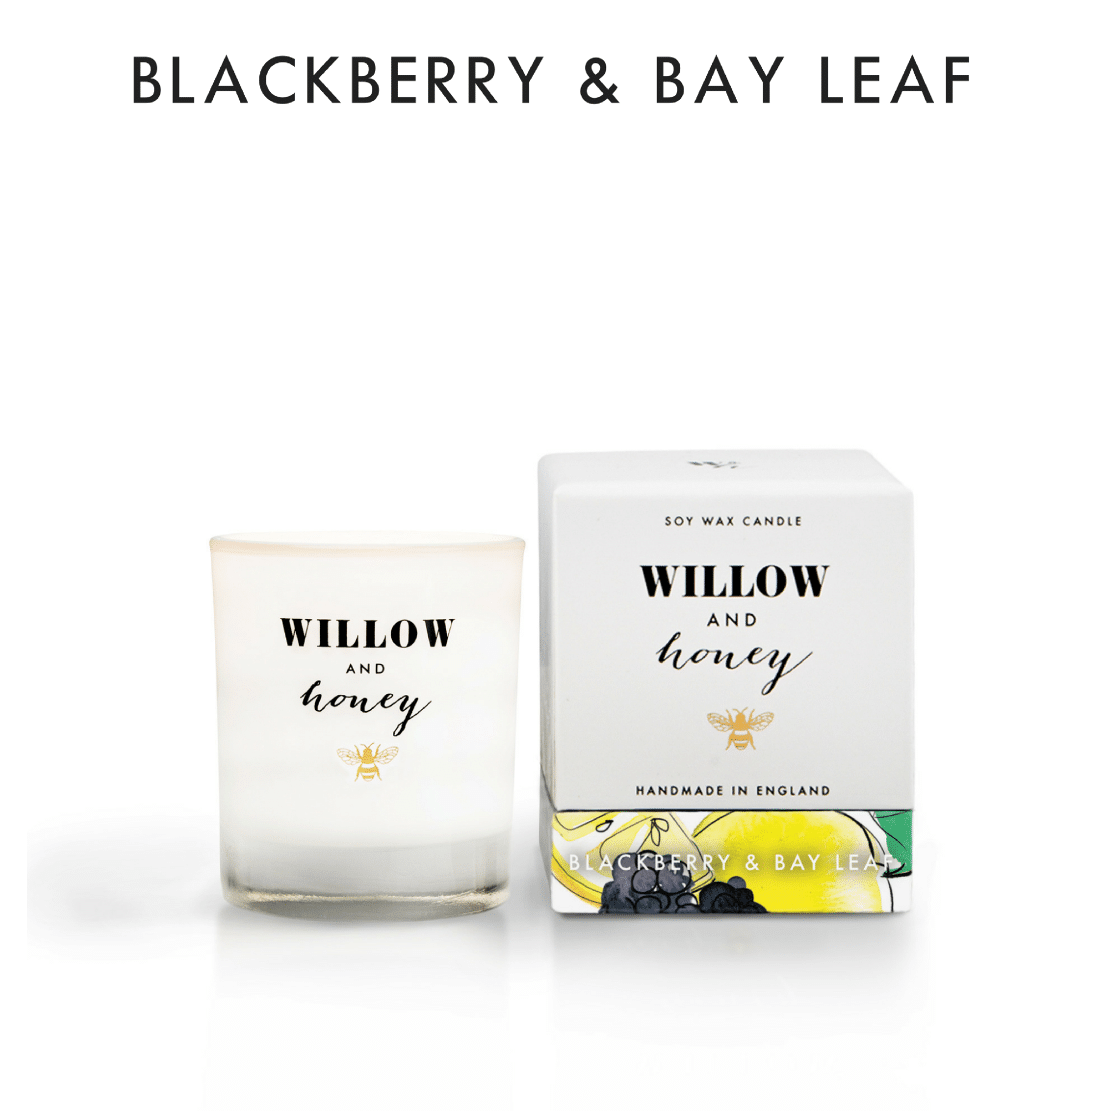 Willow and Honey Blackberry and Bay Leaf Candle 60g